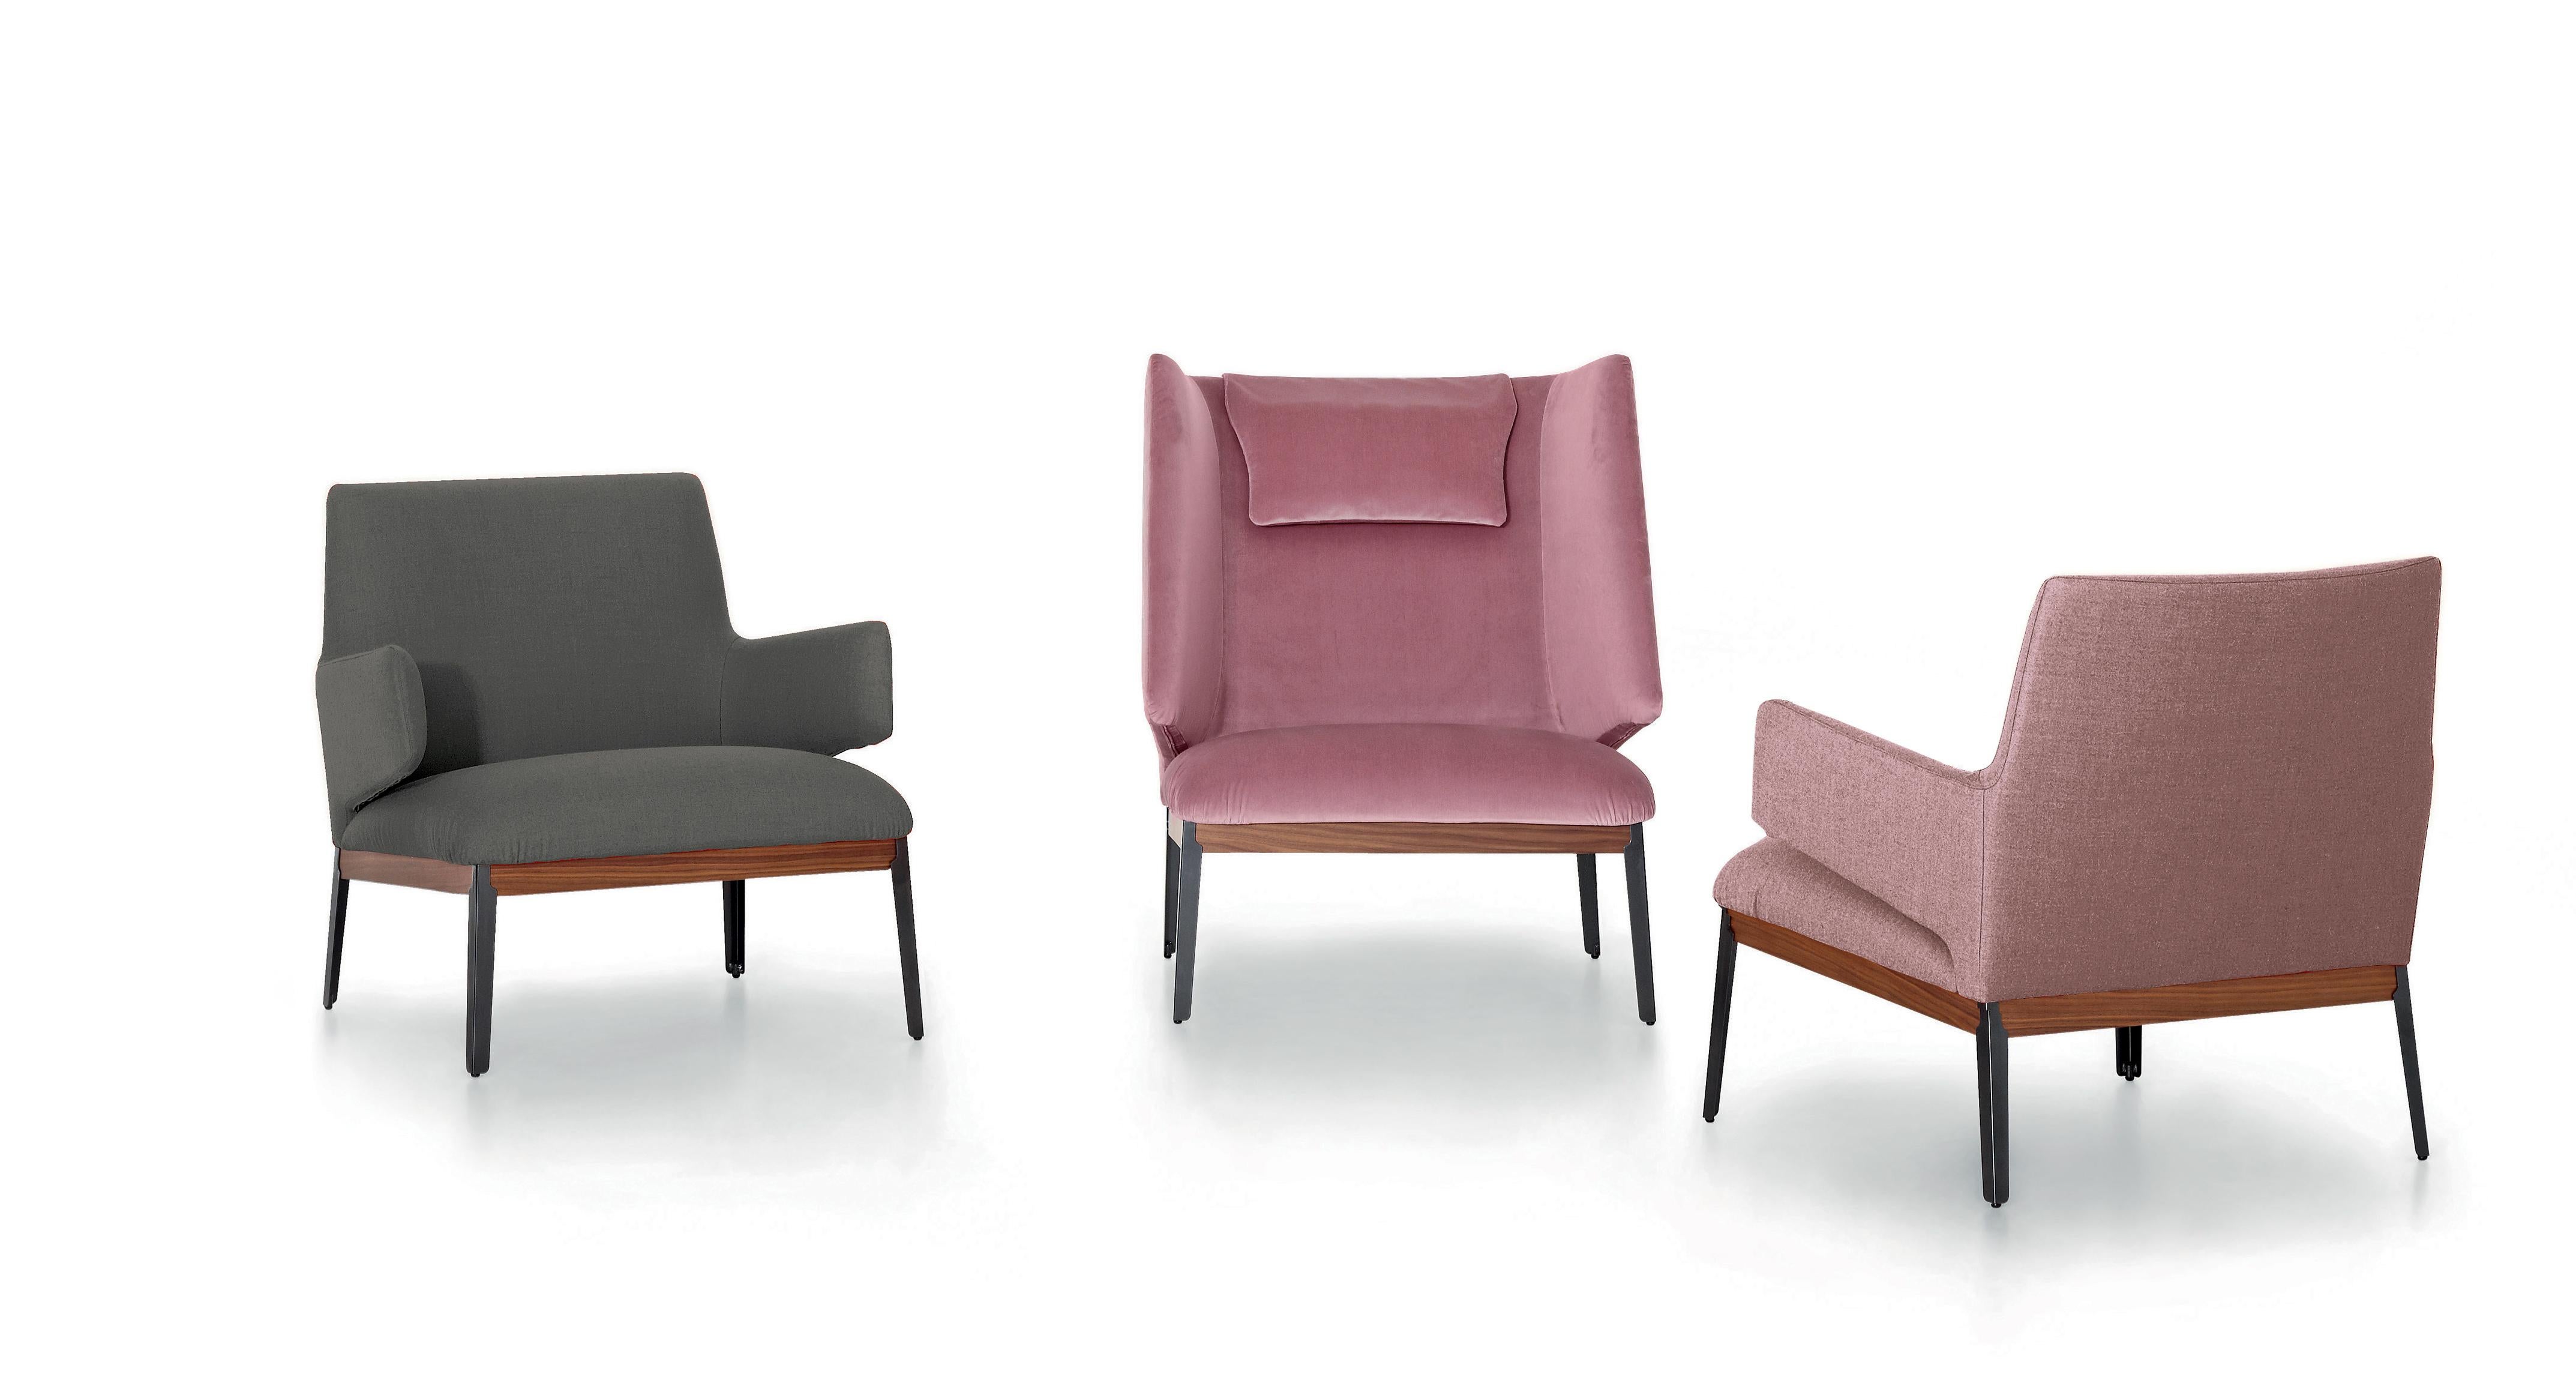 This Armchair is designed with a high level of seating comfort coupled with the very best quality upholstery solutions. In fact, each and every part of the Hug Armchair has been carefully designed to give great flexibility to the customer as well as